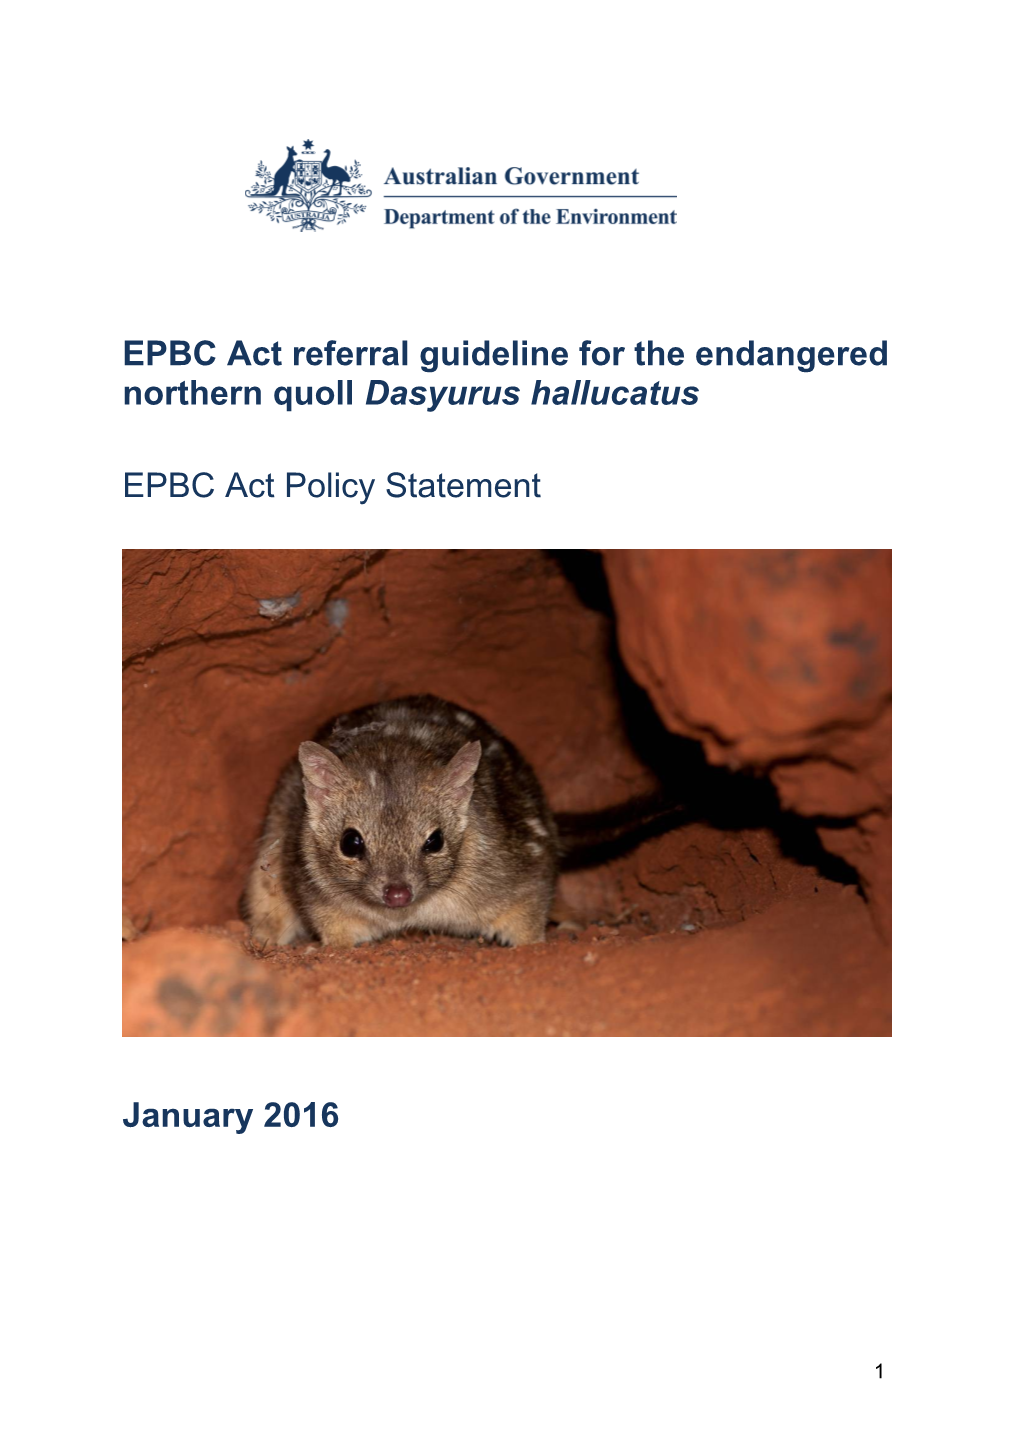 EPBC Act Referral Guideline for the Endangered Northern Quoll Dasyurus Hallucatus